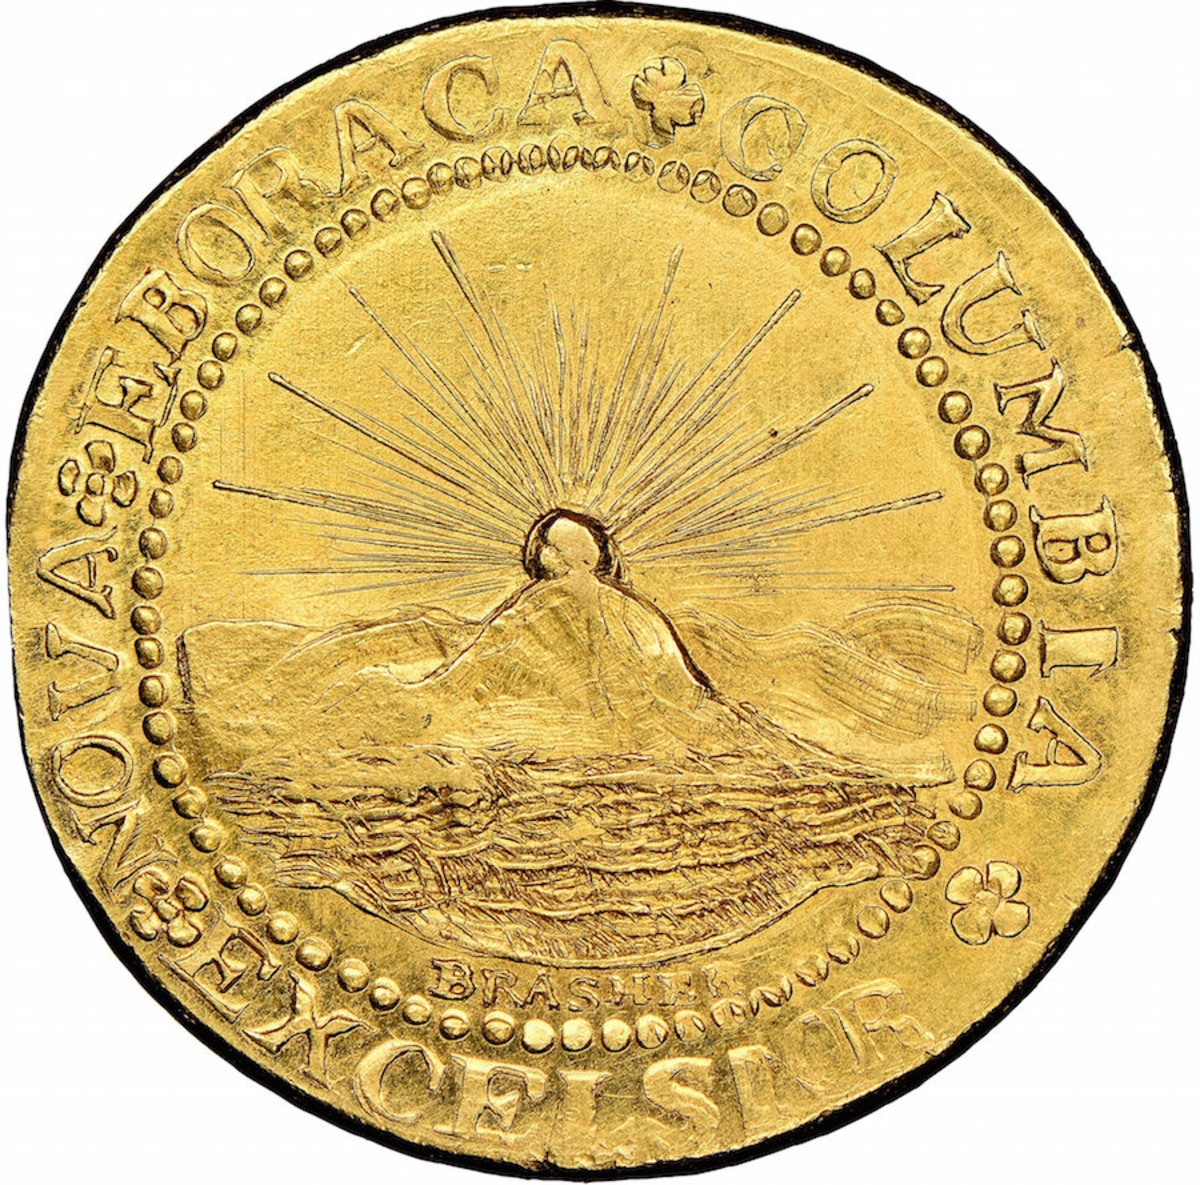 World's Most Valuable Gold Coin: Doubloon Sets $9.36 ...